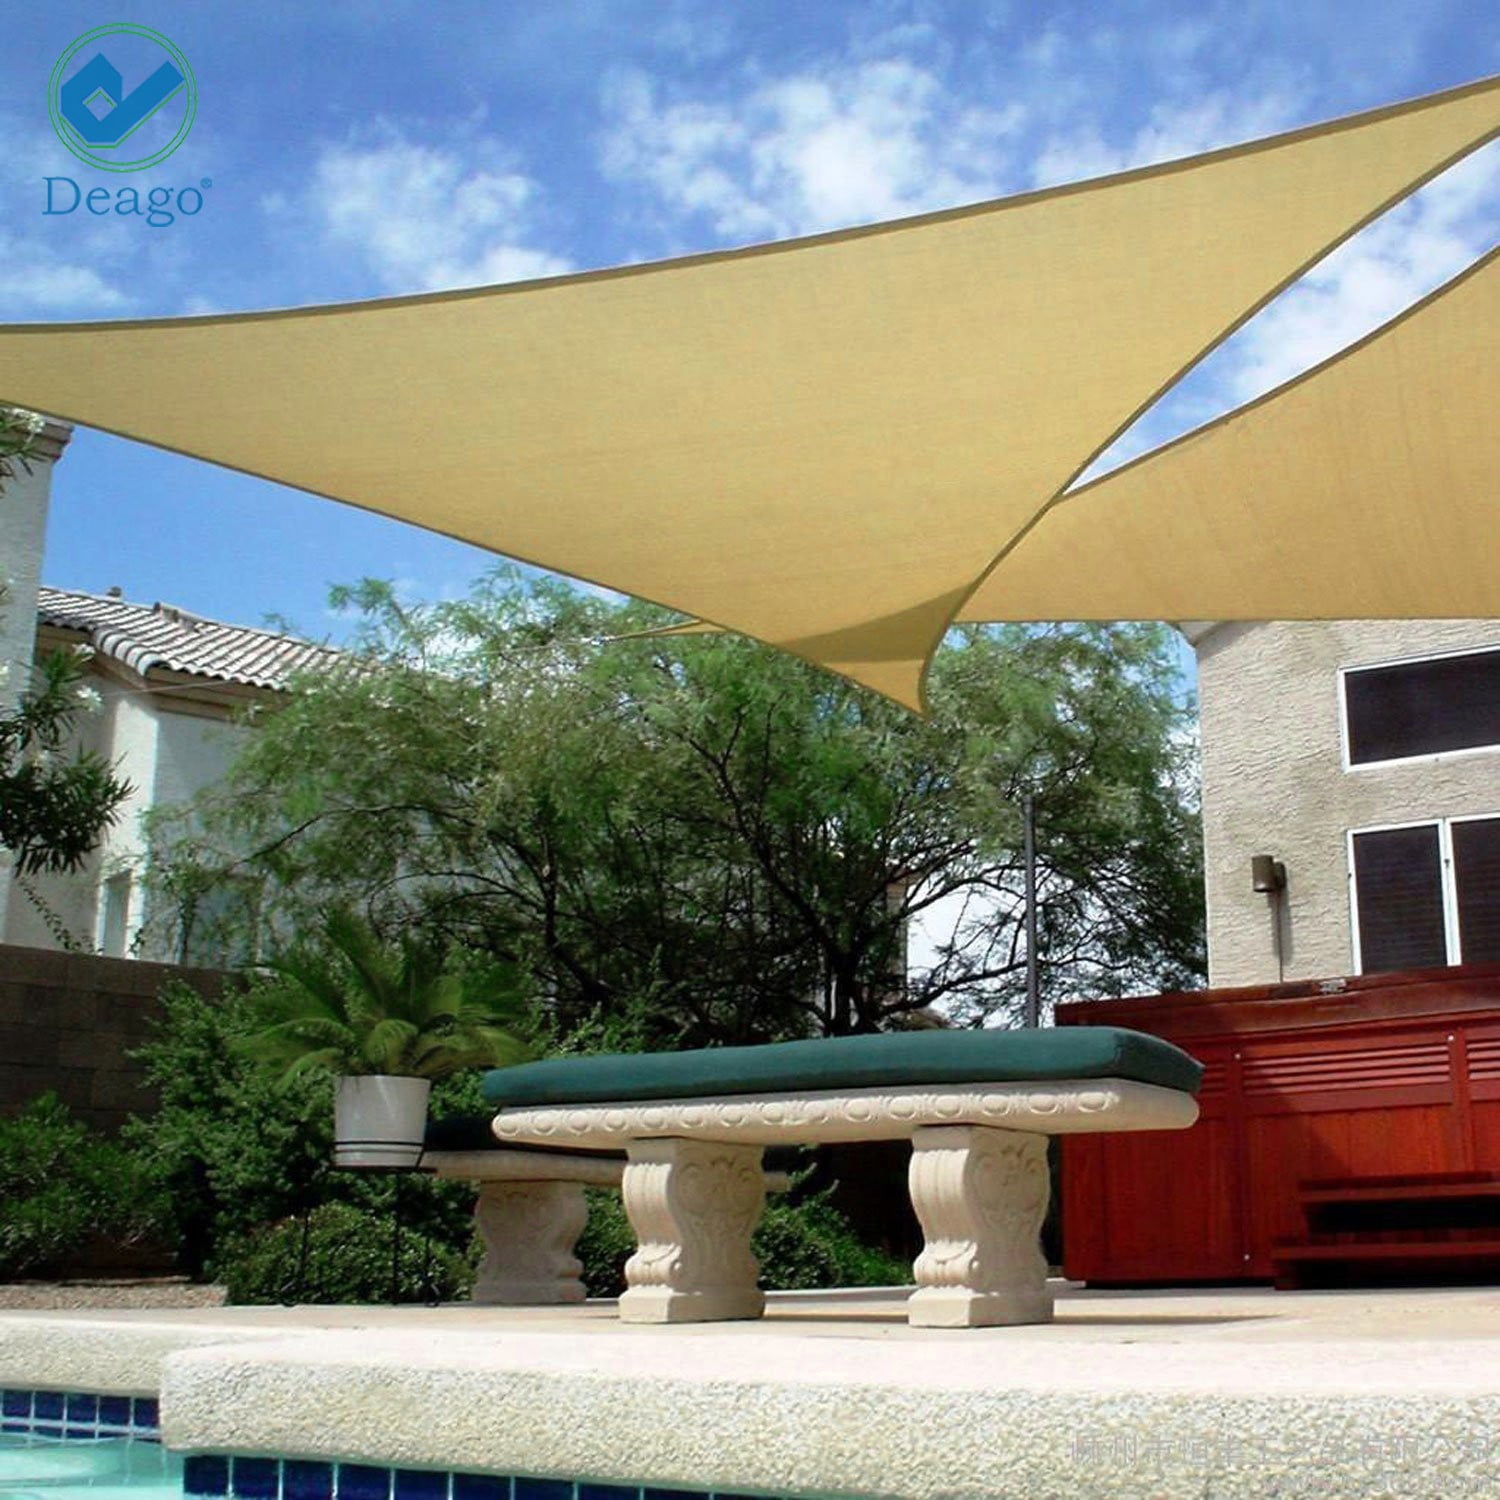 12'/ 16.5' Triangle Sun Shade Sail Outdoor Patio Pool Lawn Canopy Cover UV Block 